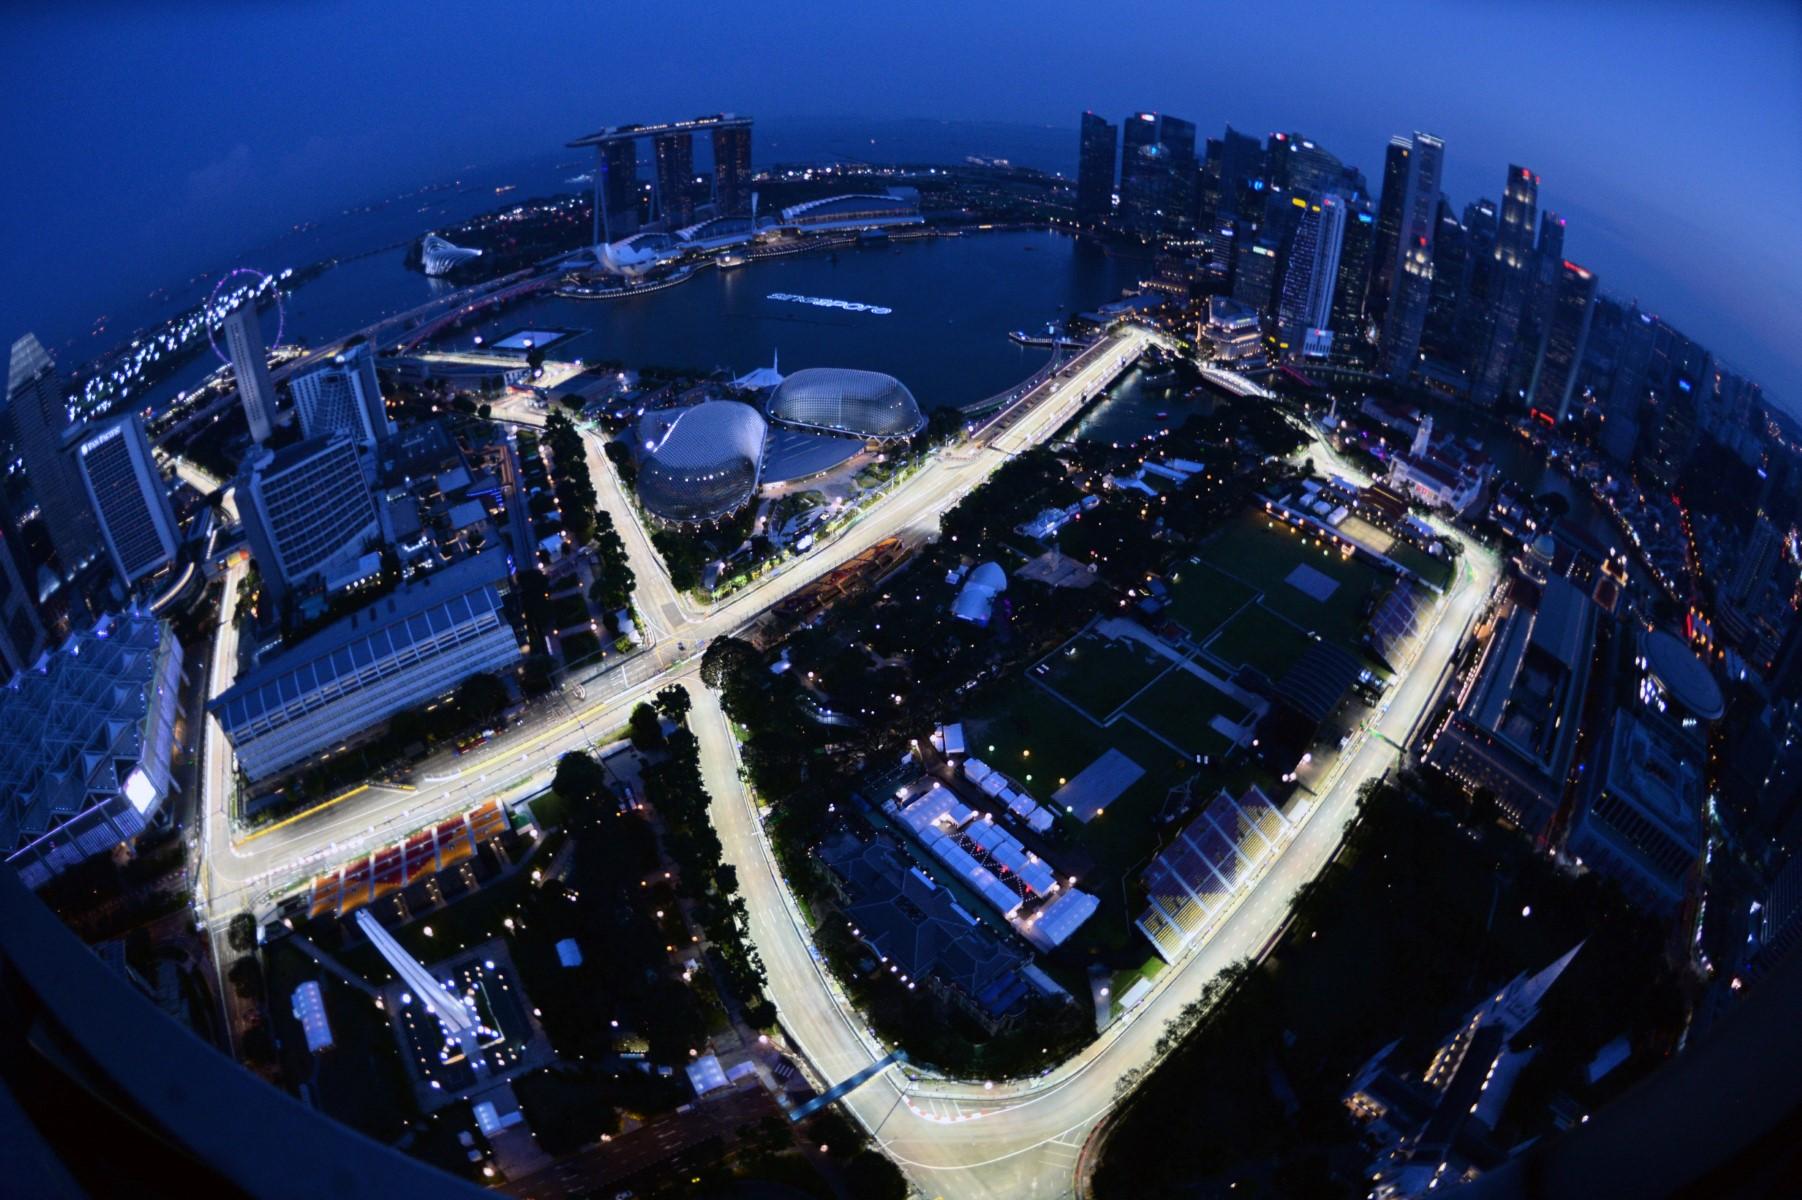 In this file photo taken on Sept 14, 2017, a general view taken from Swissotel the Stamford shows the illuminated circuit for the Formula One Singapore Grand Prix night race. Photo: AFP